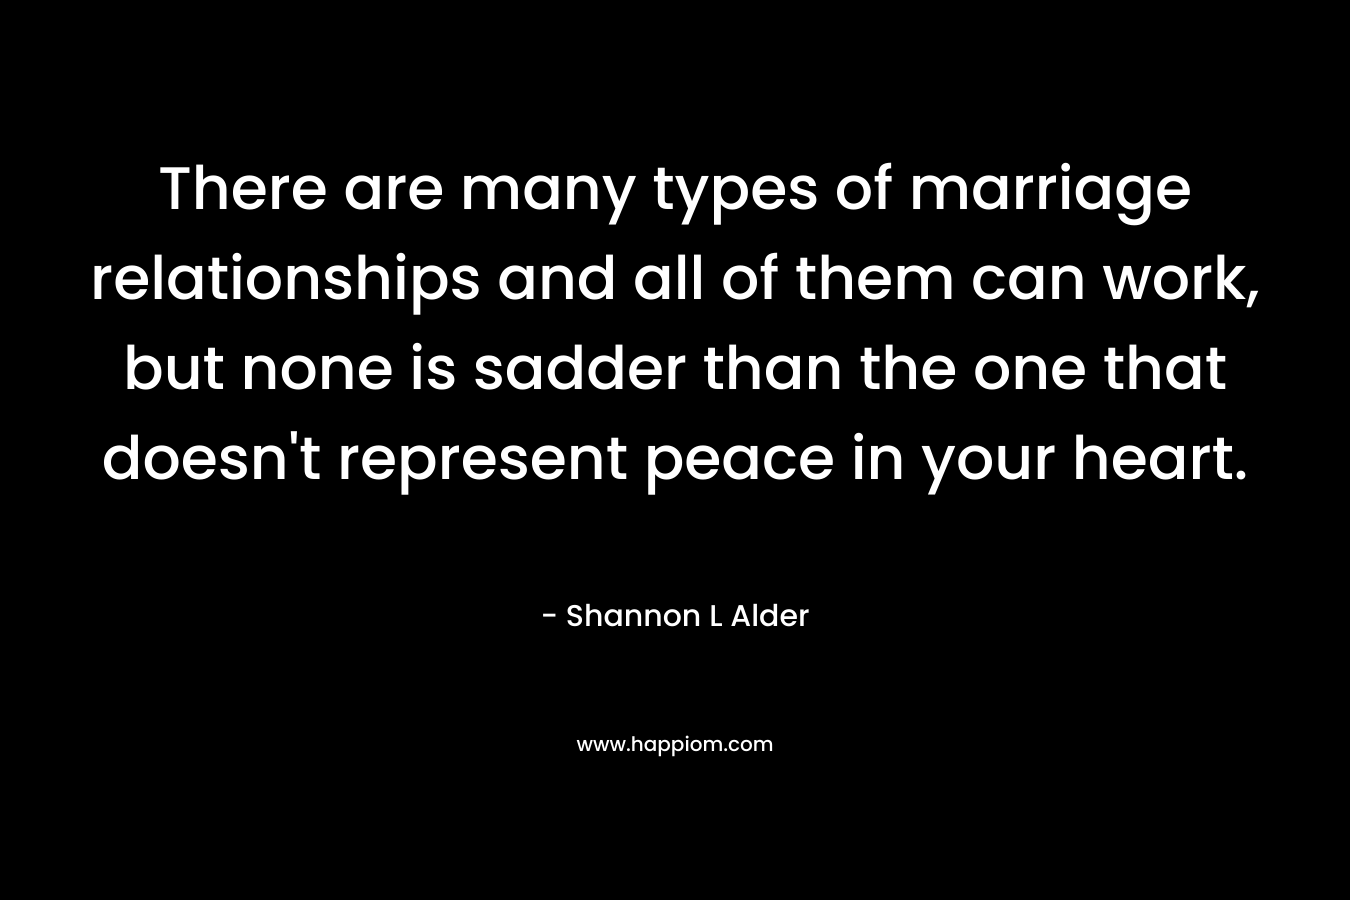 There are many types of marriage relationships and all of them can work, but none is sadder than the one that doesn’t represent peace in your heart. – Shannon L Alder